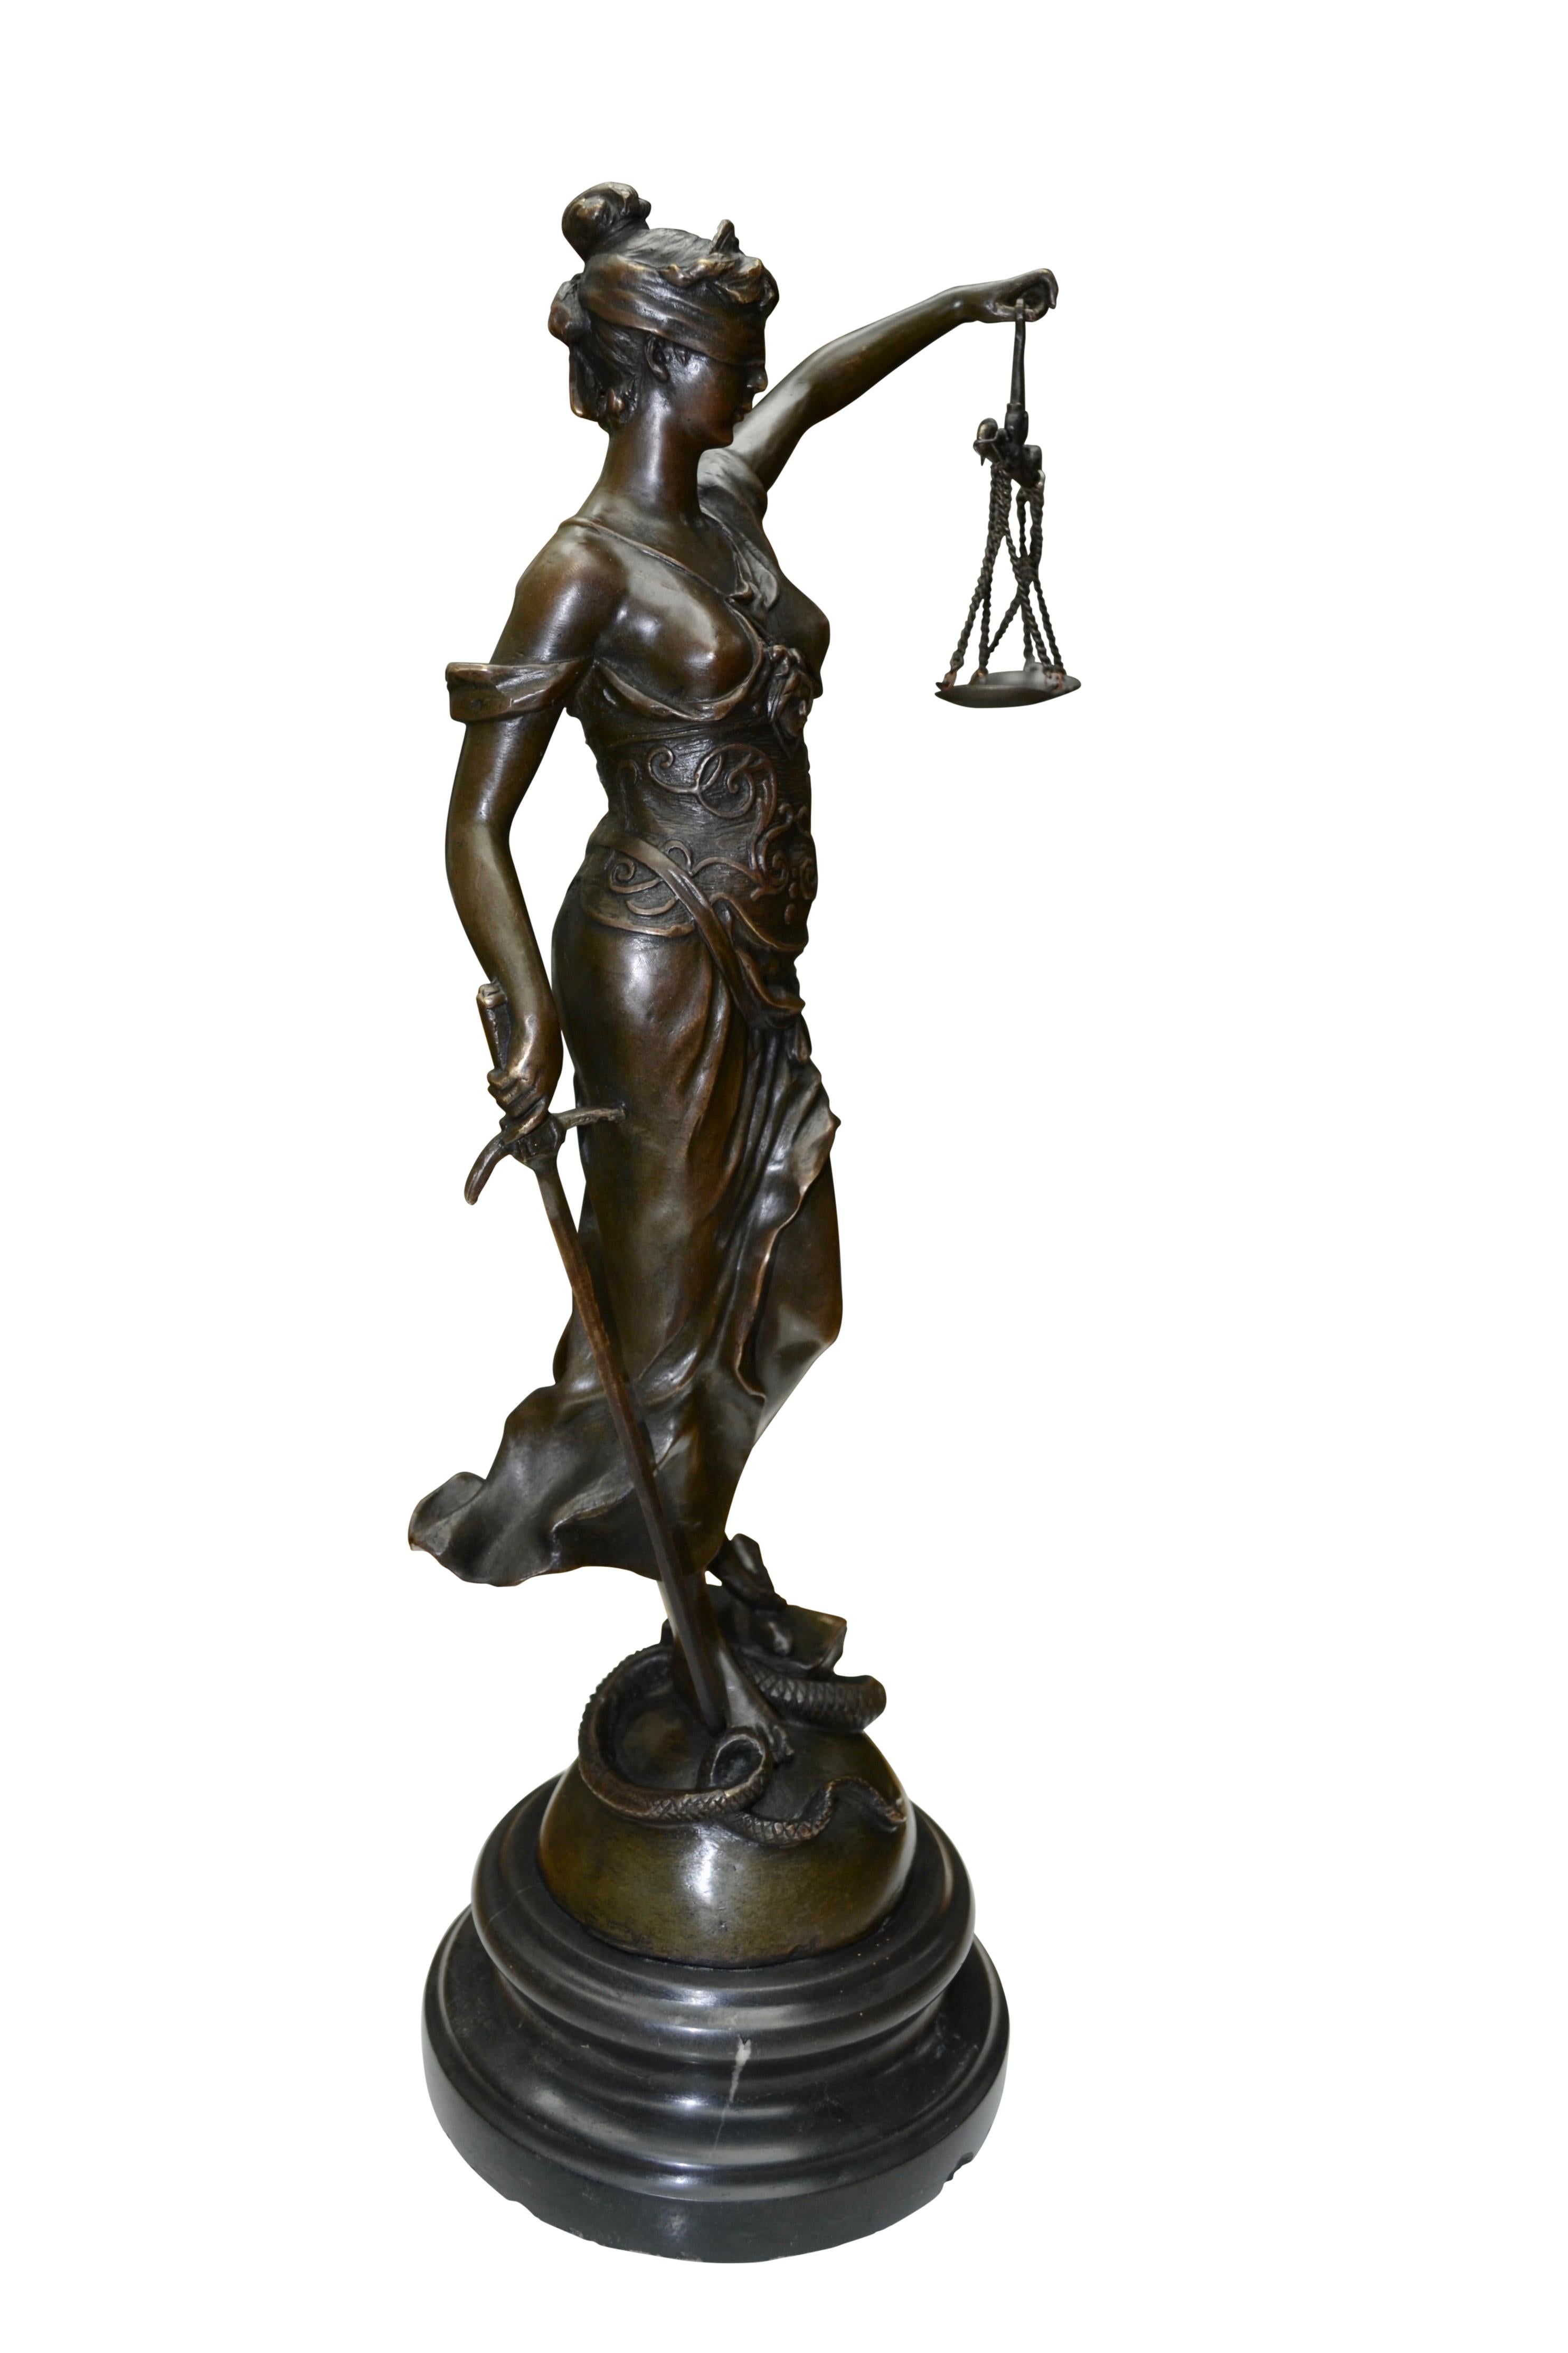 A well cast patinated early 20 century allegorical bronze statue of Lady Justice shown as a bare breasted and classically draped standing maiden blindfolded and holding aloft a two tray balance scale in one hand and a sword in the other while